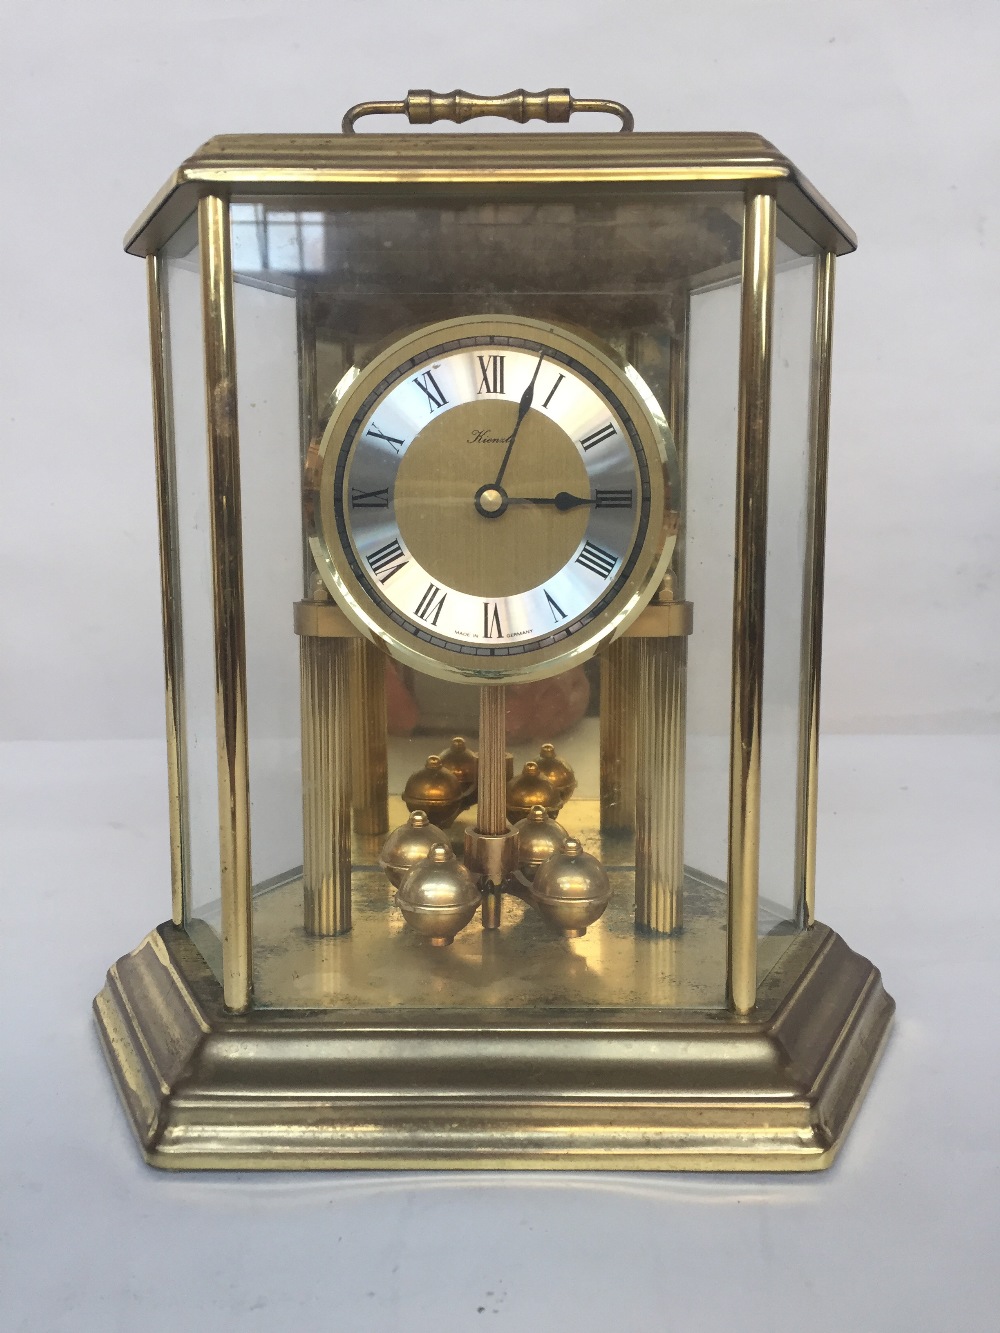 A hexagonal Kienzle torsion clock with Roman numerals on a white and yellow metal dial